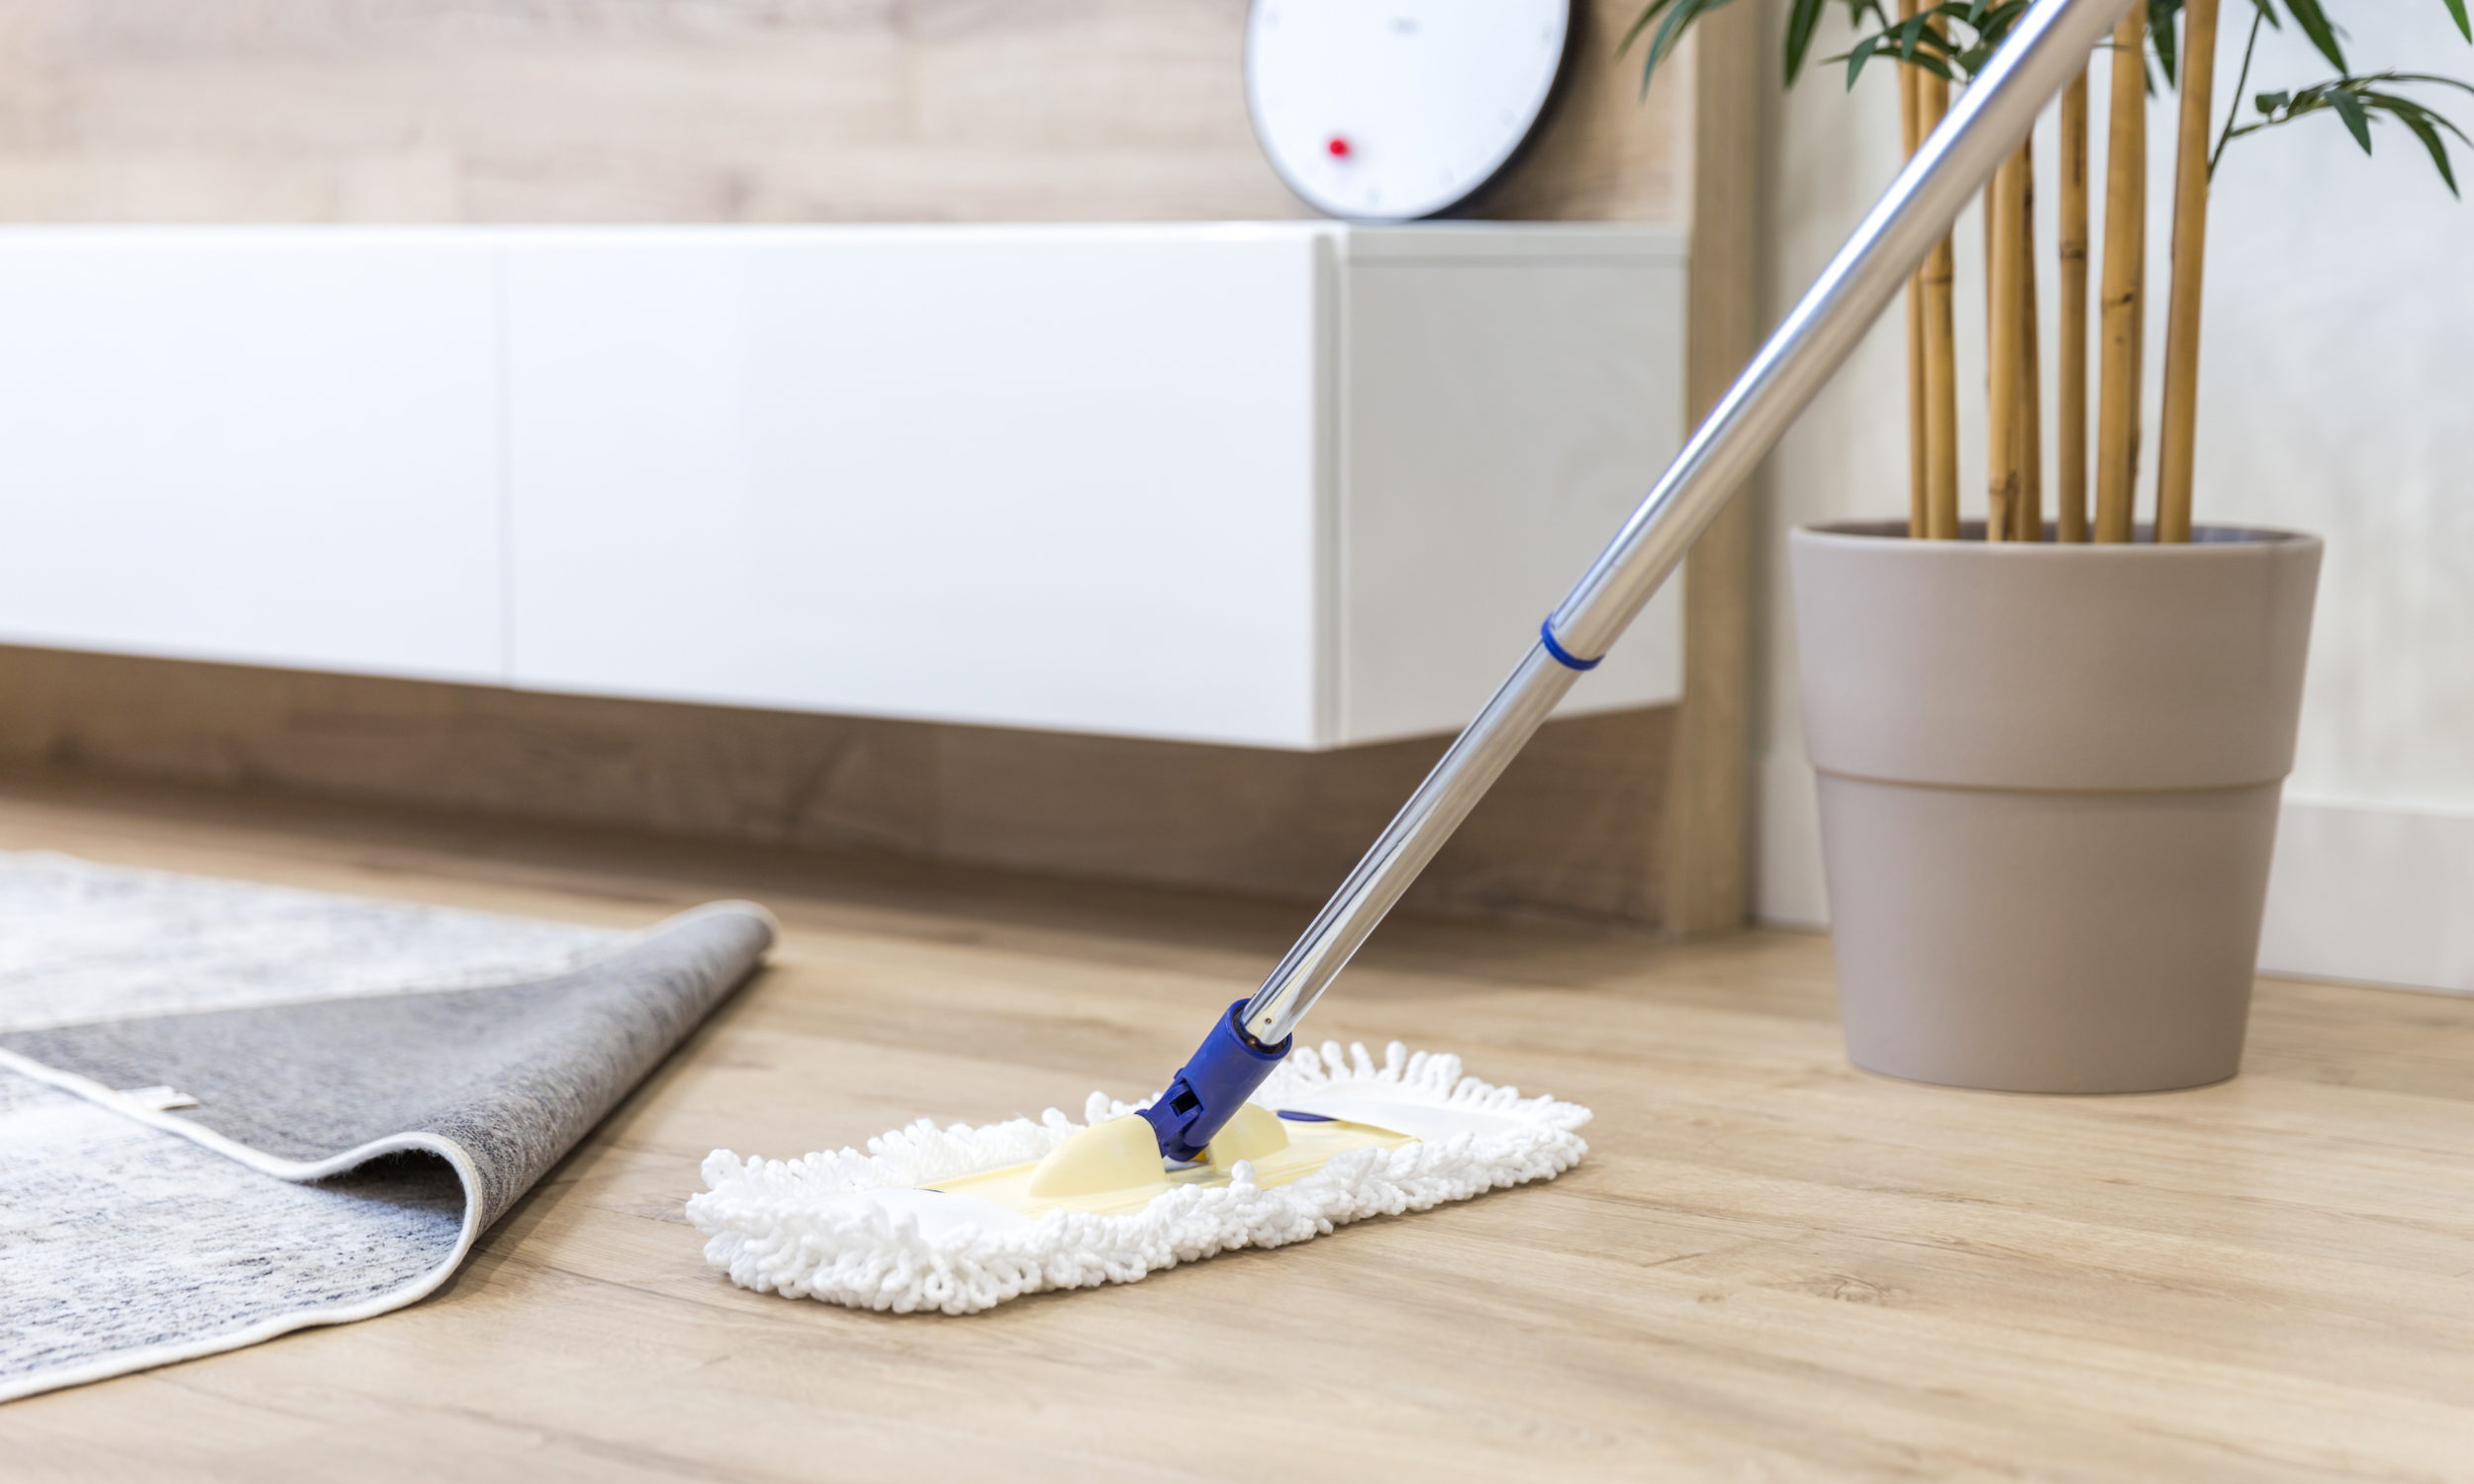 deluxe cleaning service • The Boardwalk Cleaning Co.